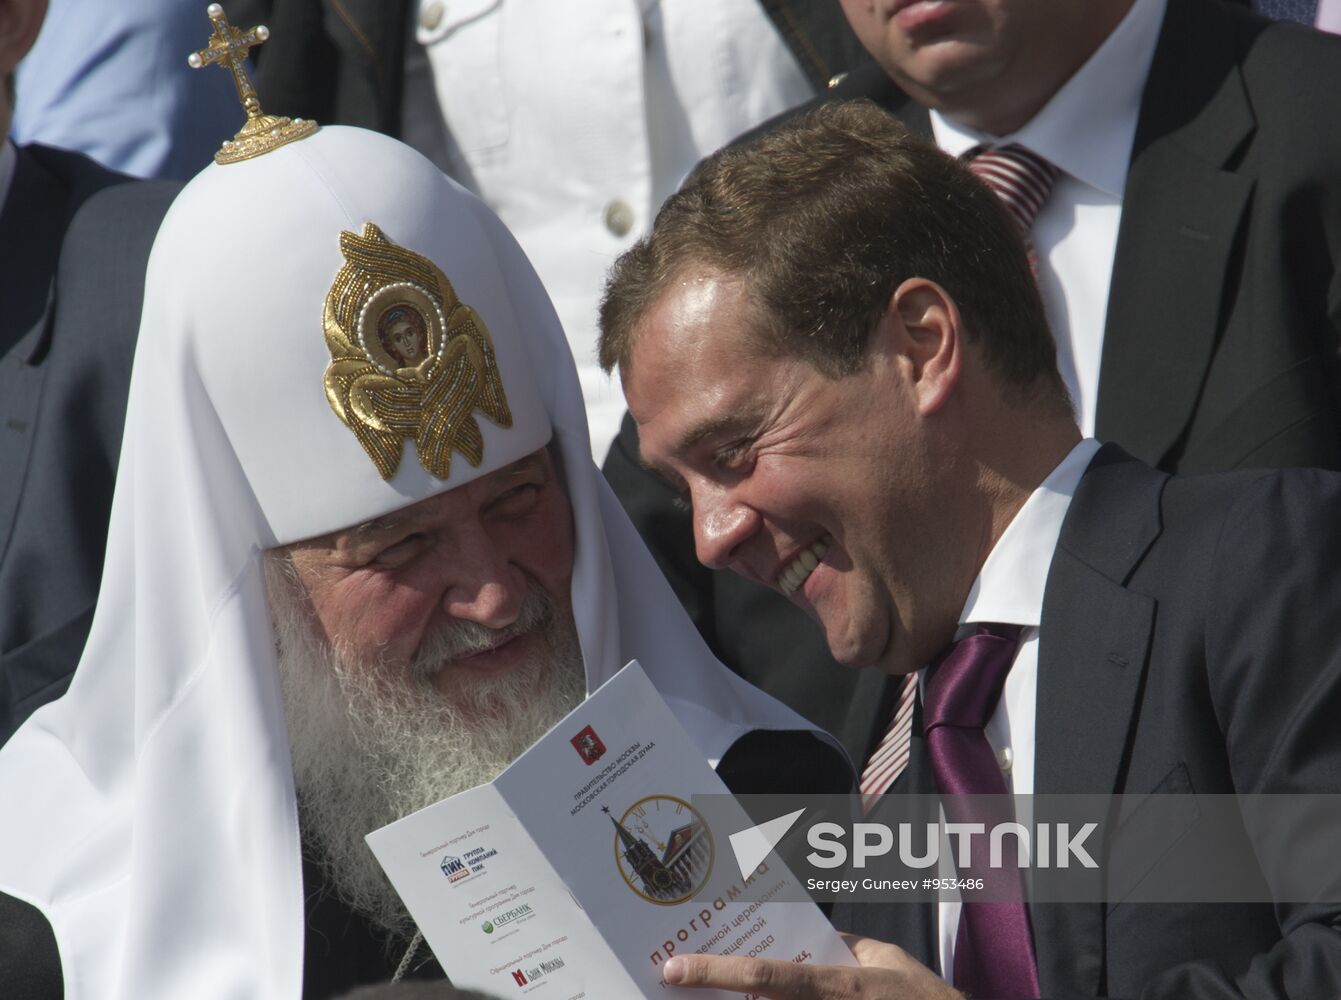 Dmitry Medvedev participates in Moscow City Day celebration